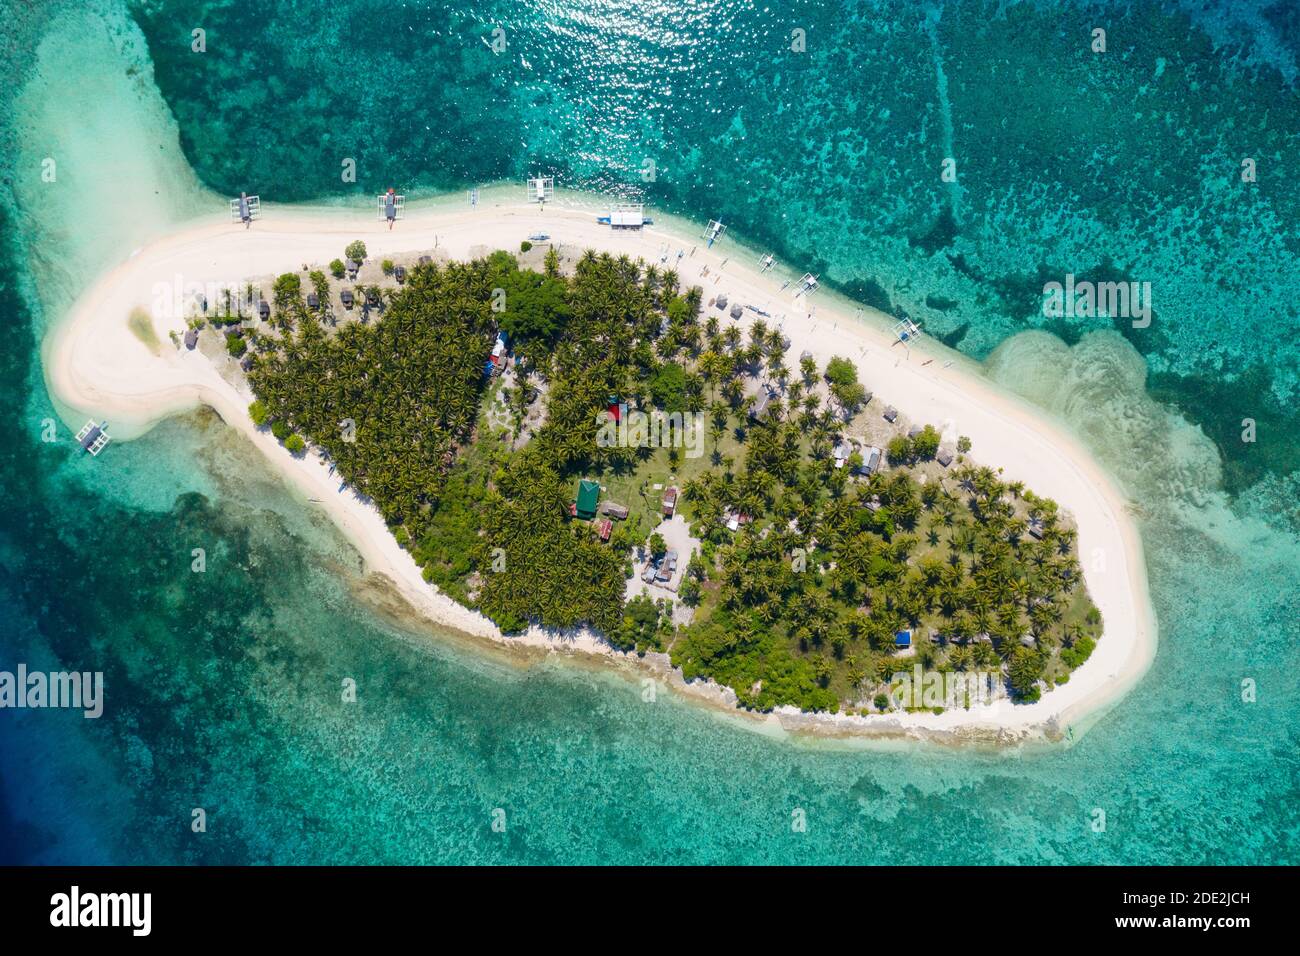 Island with a tropical beach and turquoise lagoons. White sand beach with coconut trees, top view. Digyo Island, Philippines. Stock Photo